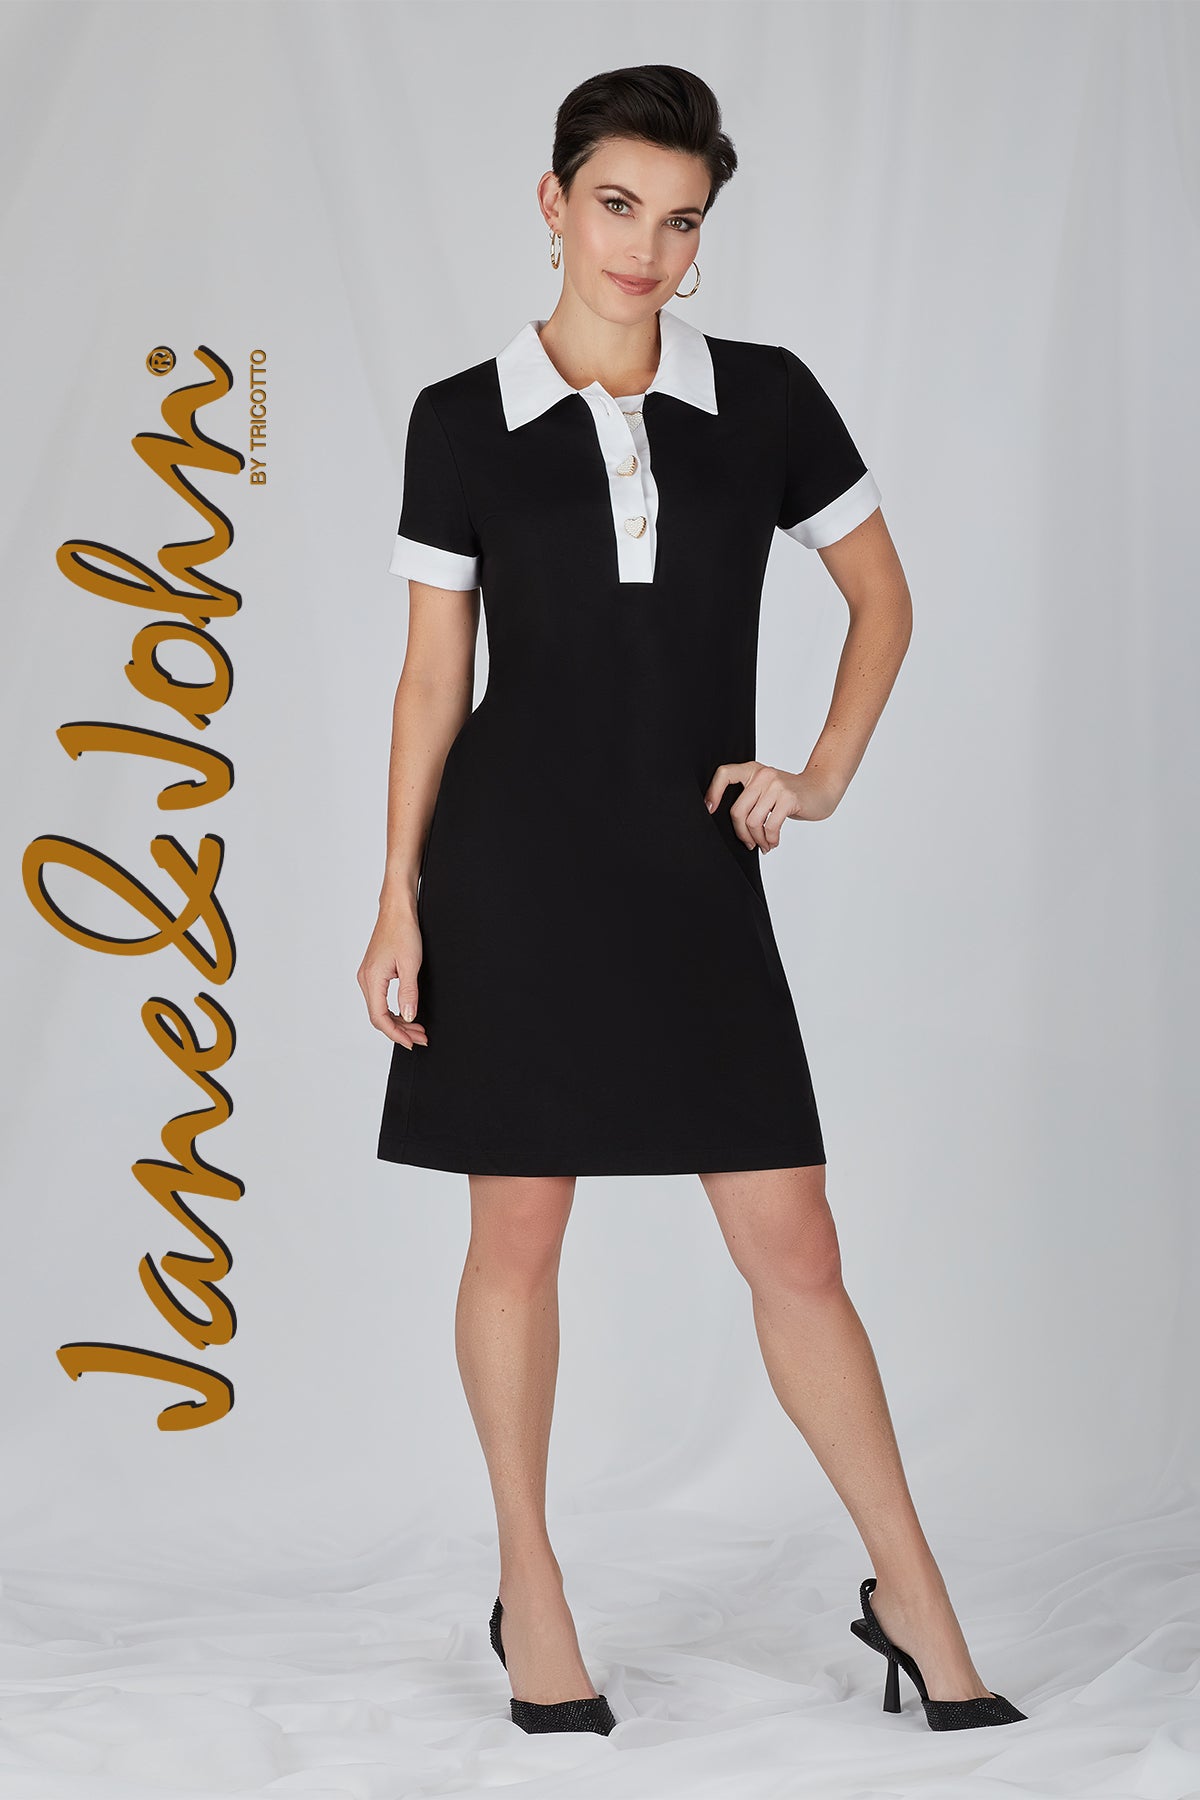 Jane & John Black Collared Dress With Heart Button Detail